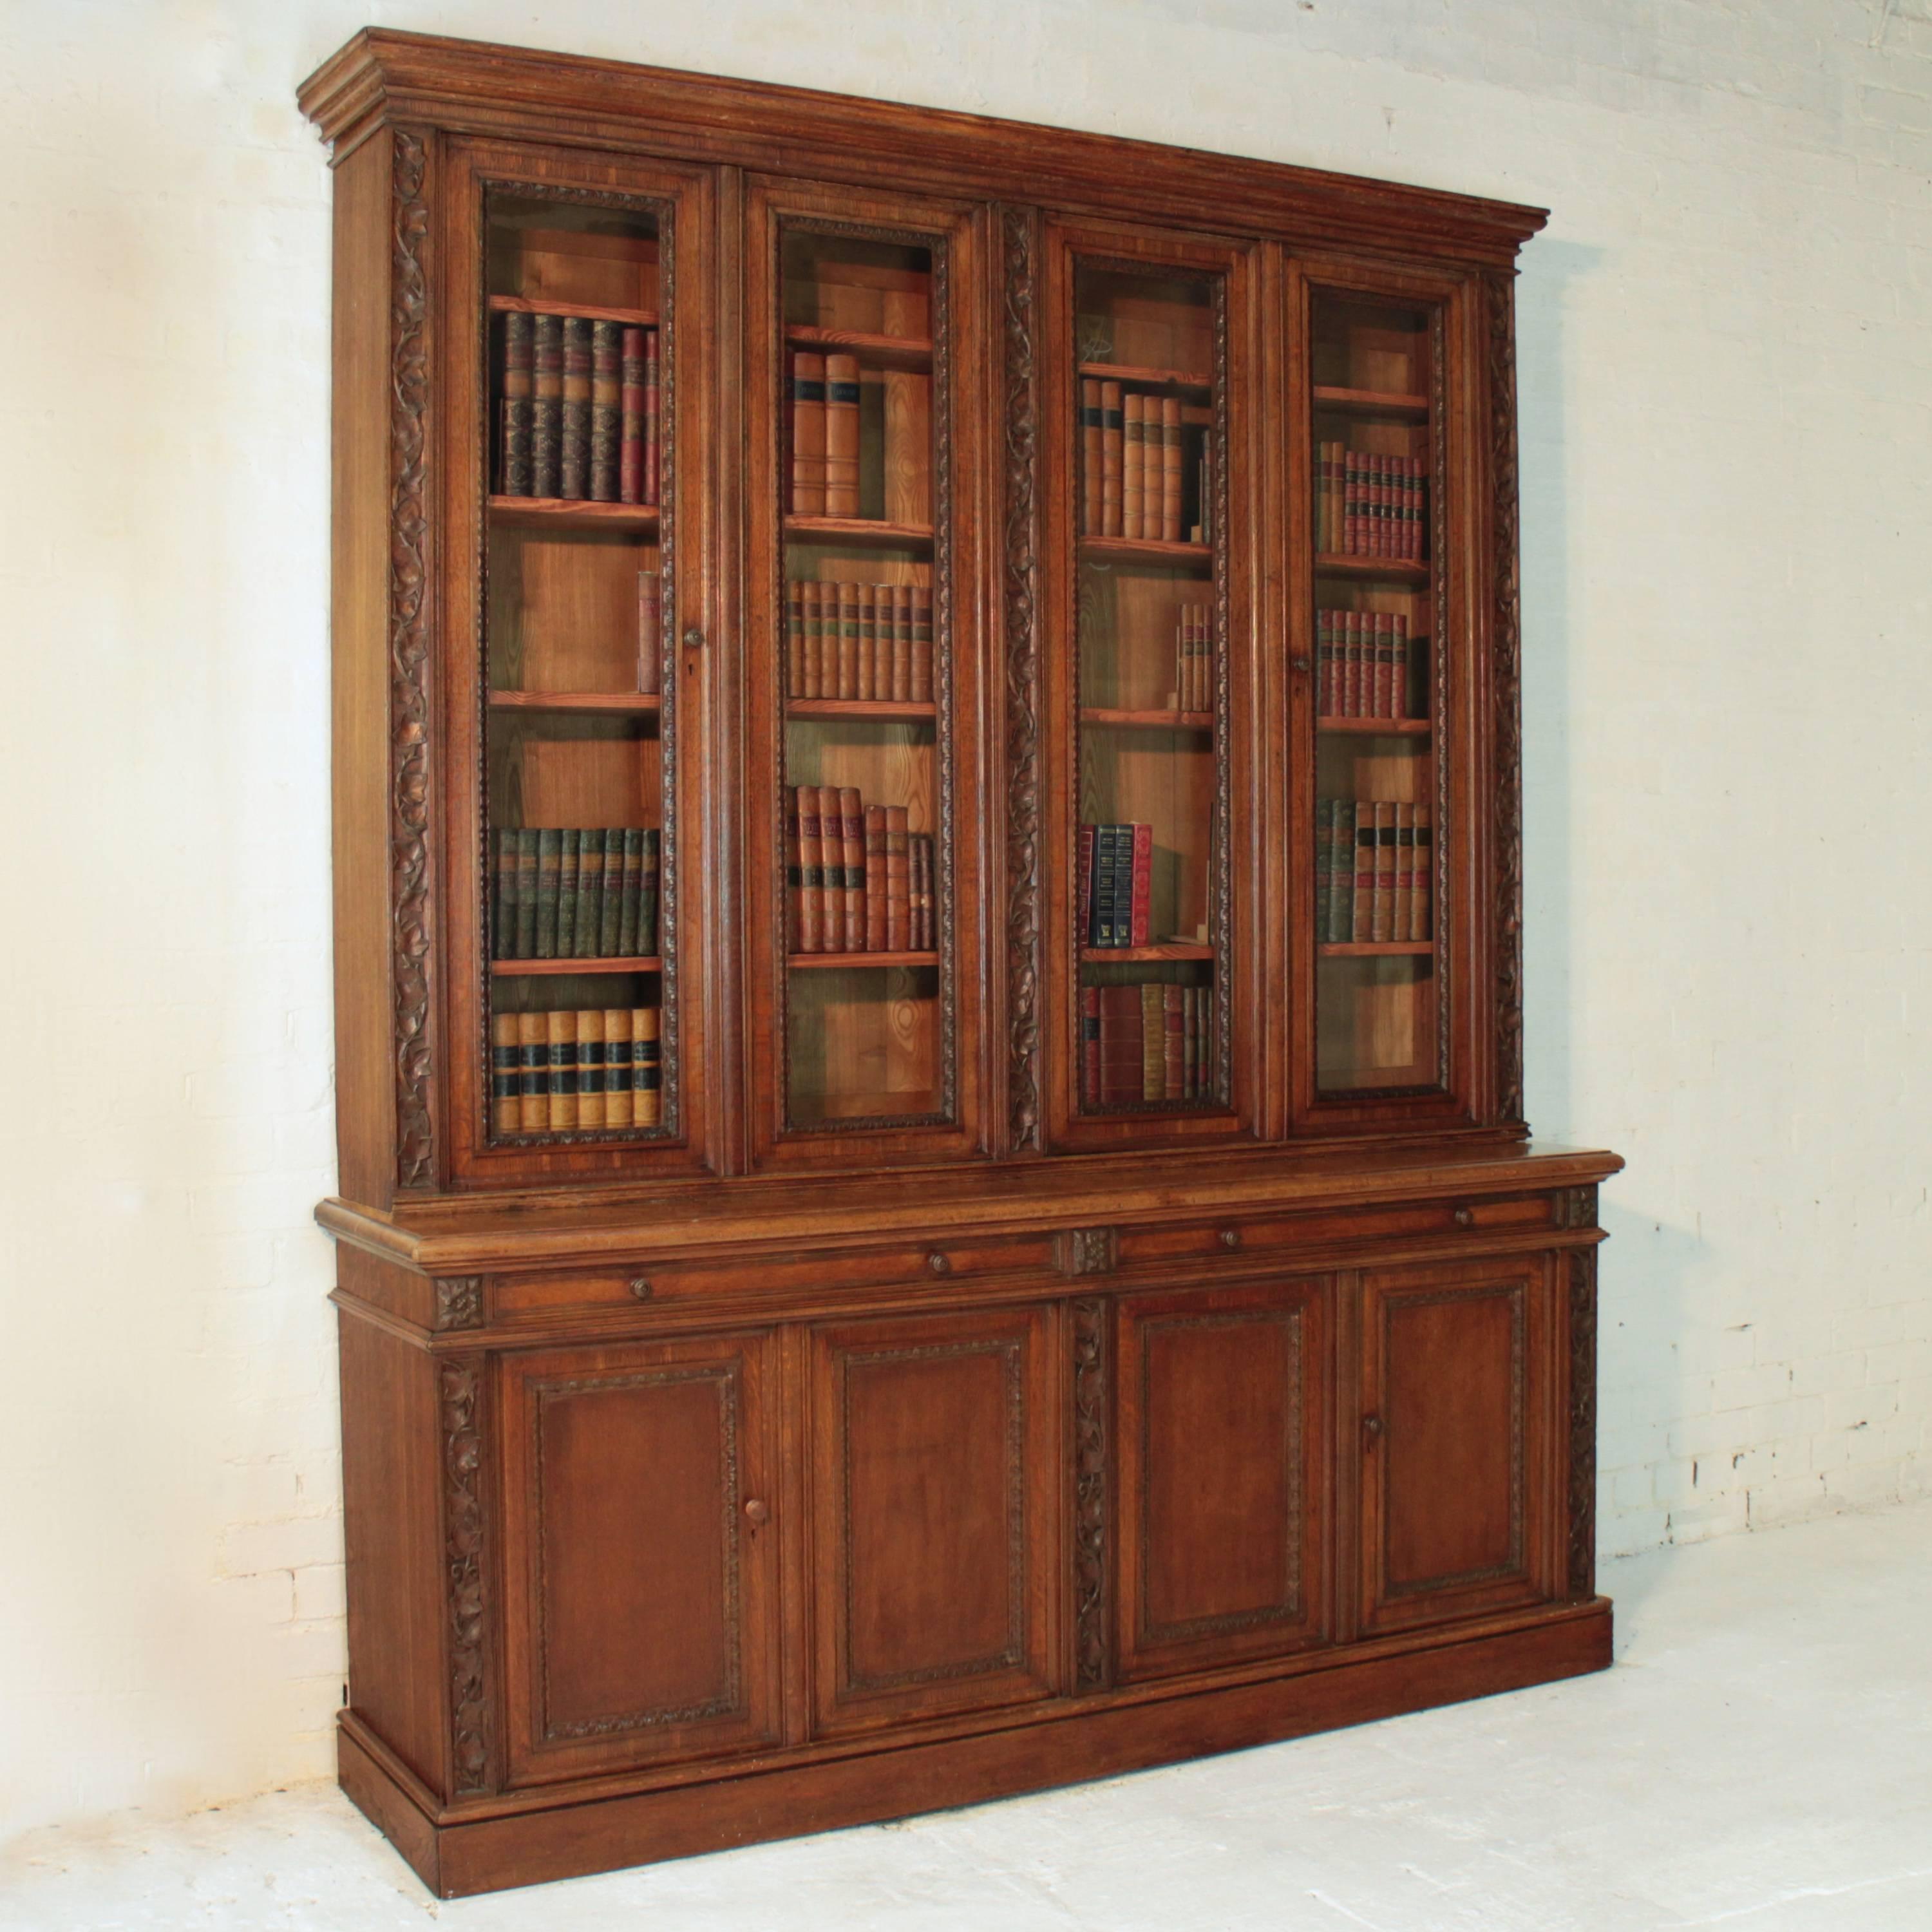 A beautiful Victorian four-door library bookcase with carved panels of climbing ivy and a parquetry veneered top. It has carved mouldings to the four glazed doors, two imitation drawers and four fielded panel doors below. Fitted with wooden knob